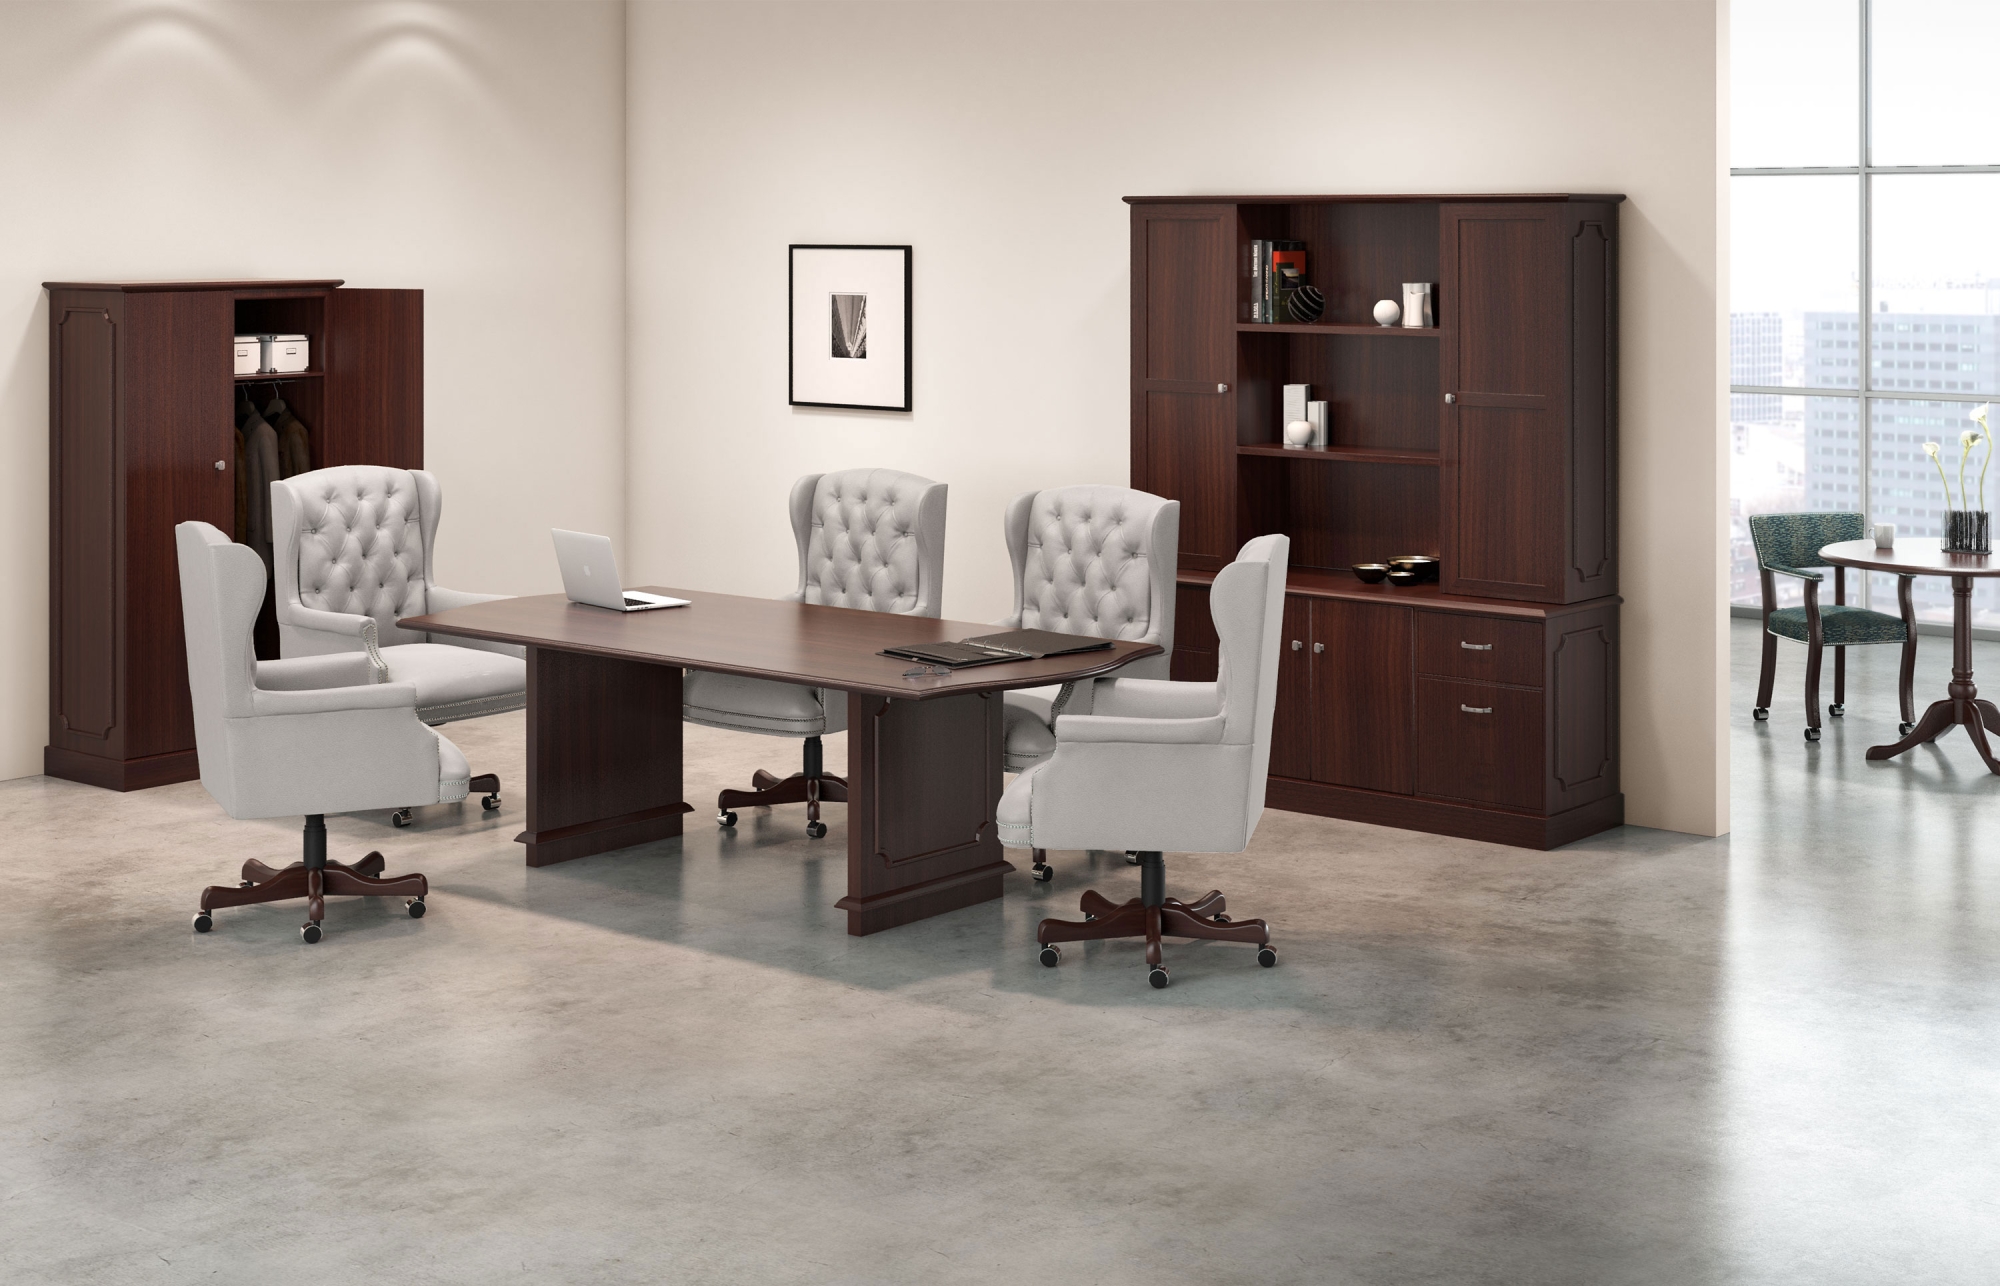 Indiana Furniture, Traditional components echo history and create timeless foundations for meeting rooms that complement our